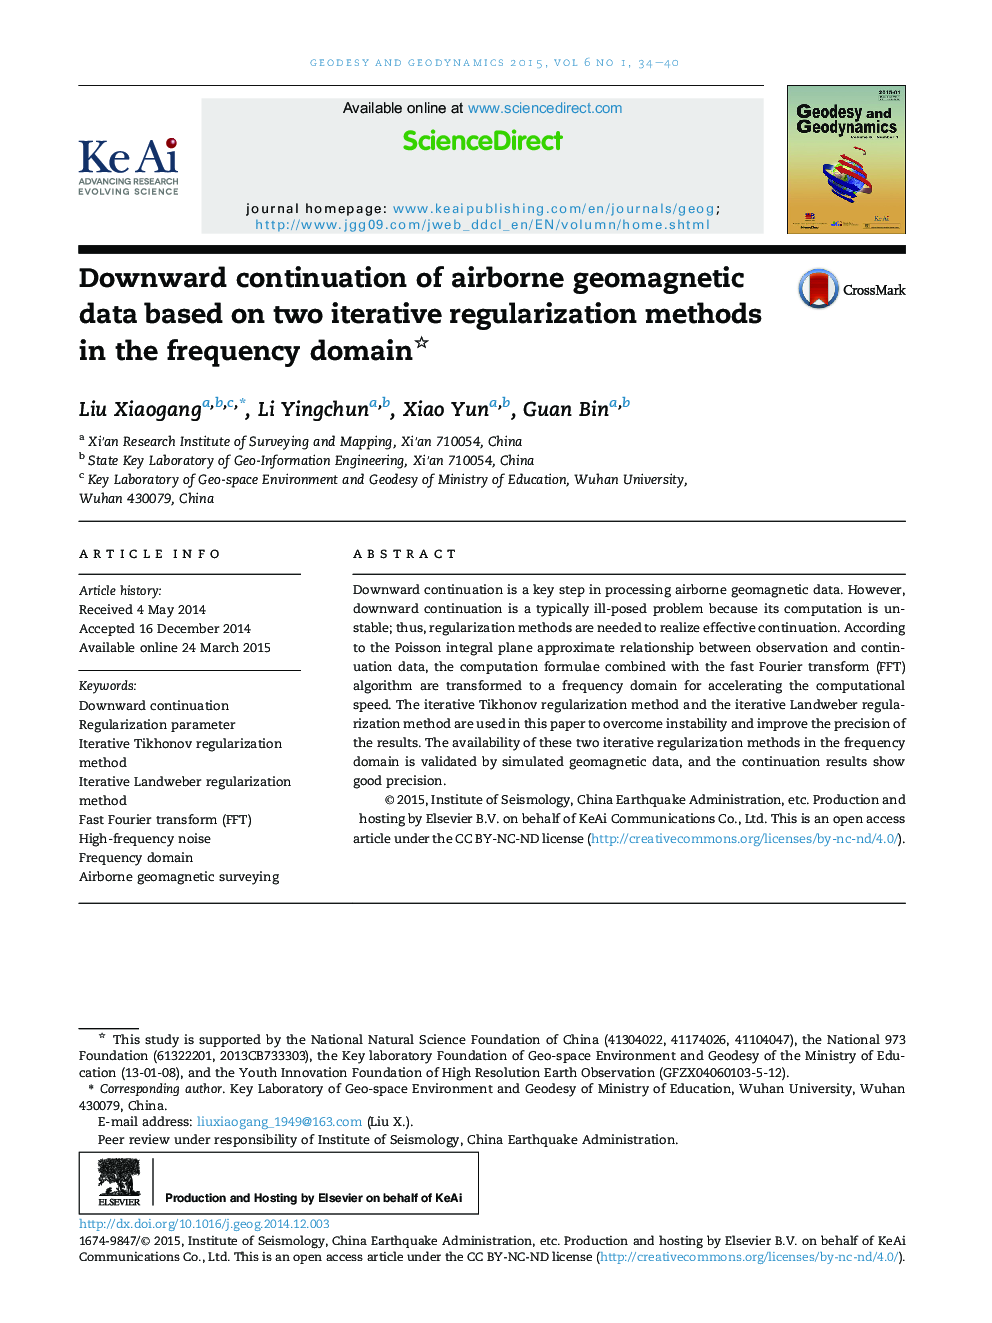 Downward continuation of airborne geomagnetic data based on two iterative regularization methods in the frequency domain 